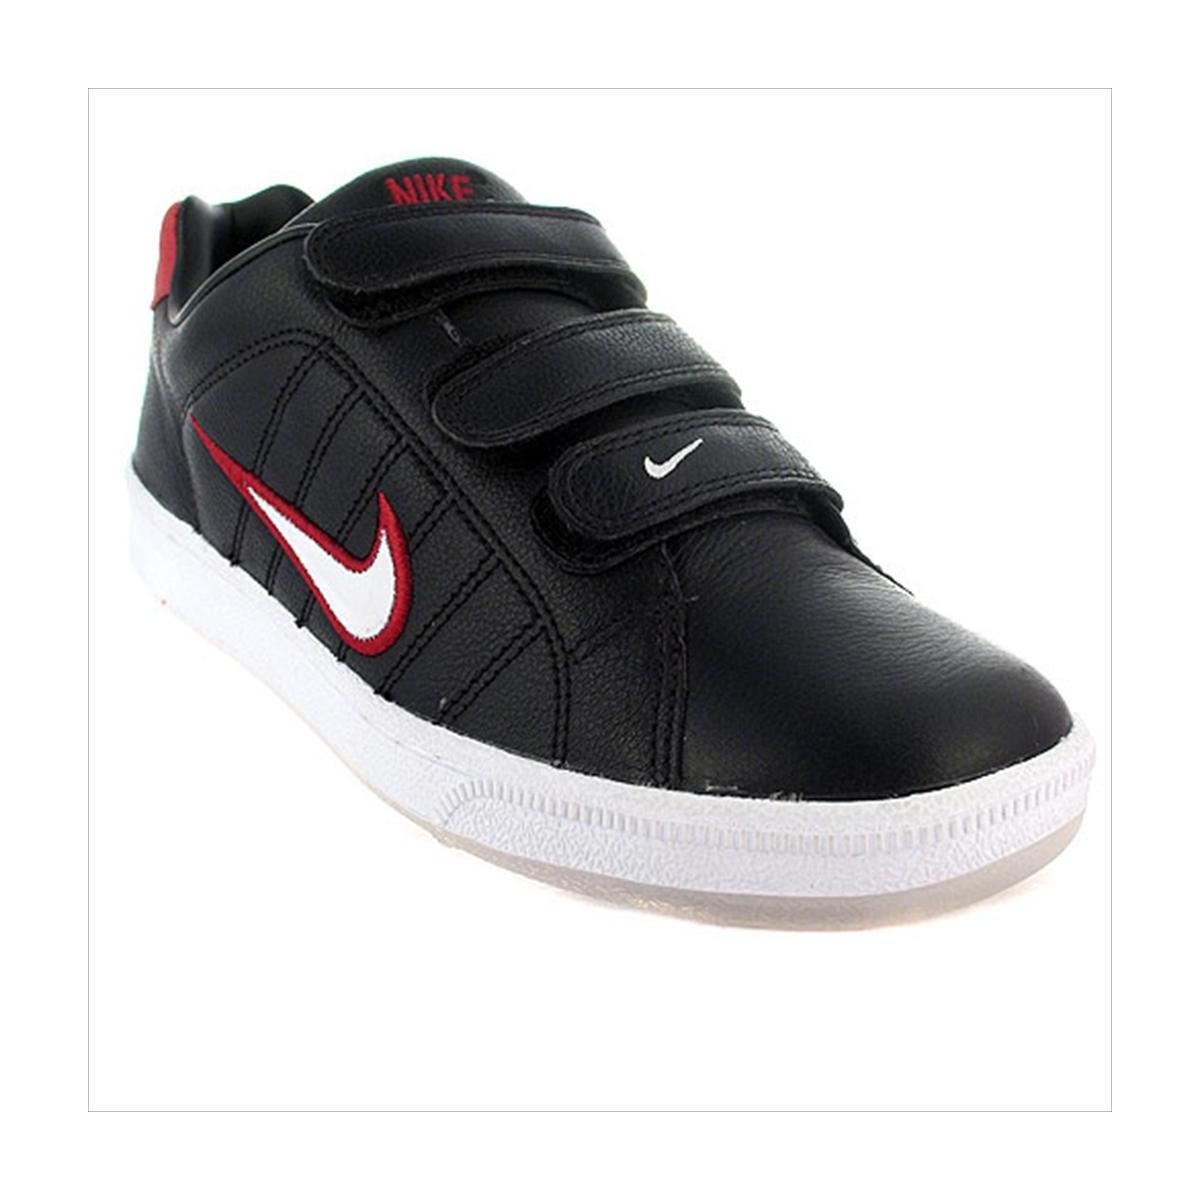 men's nike trainers with velcro fastening